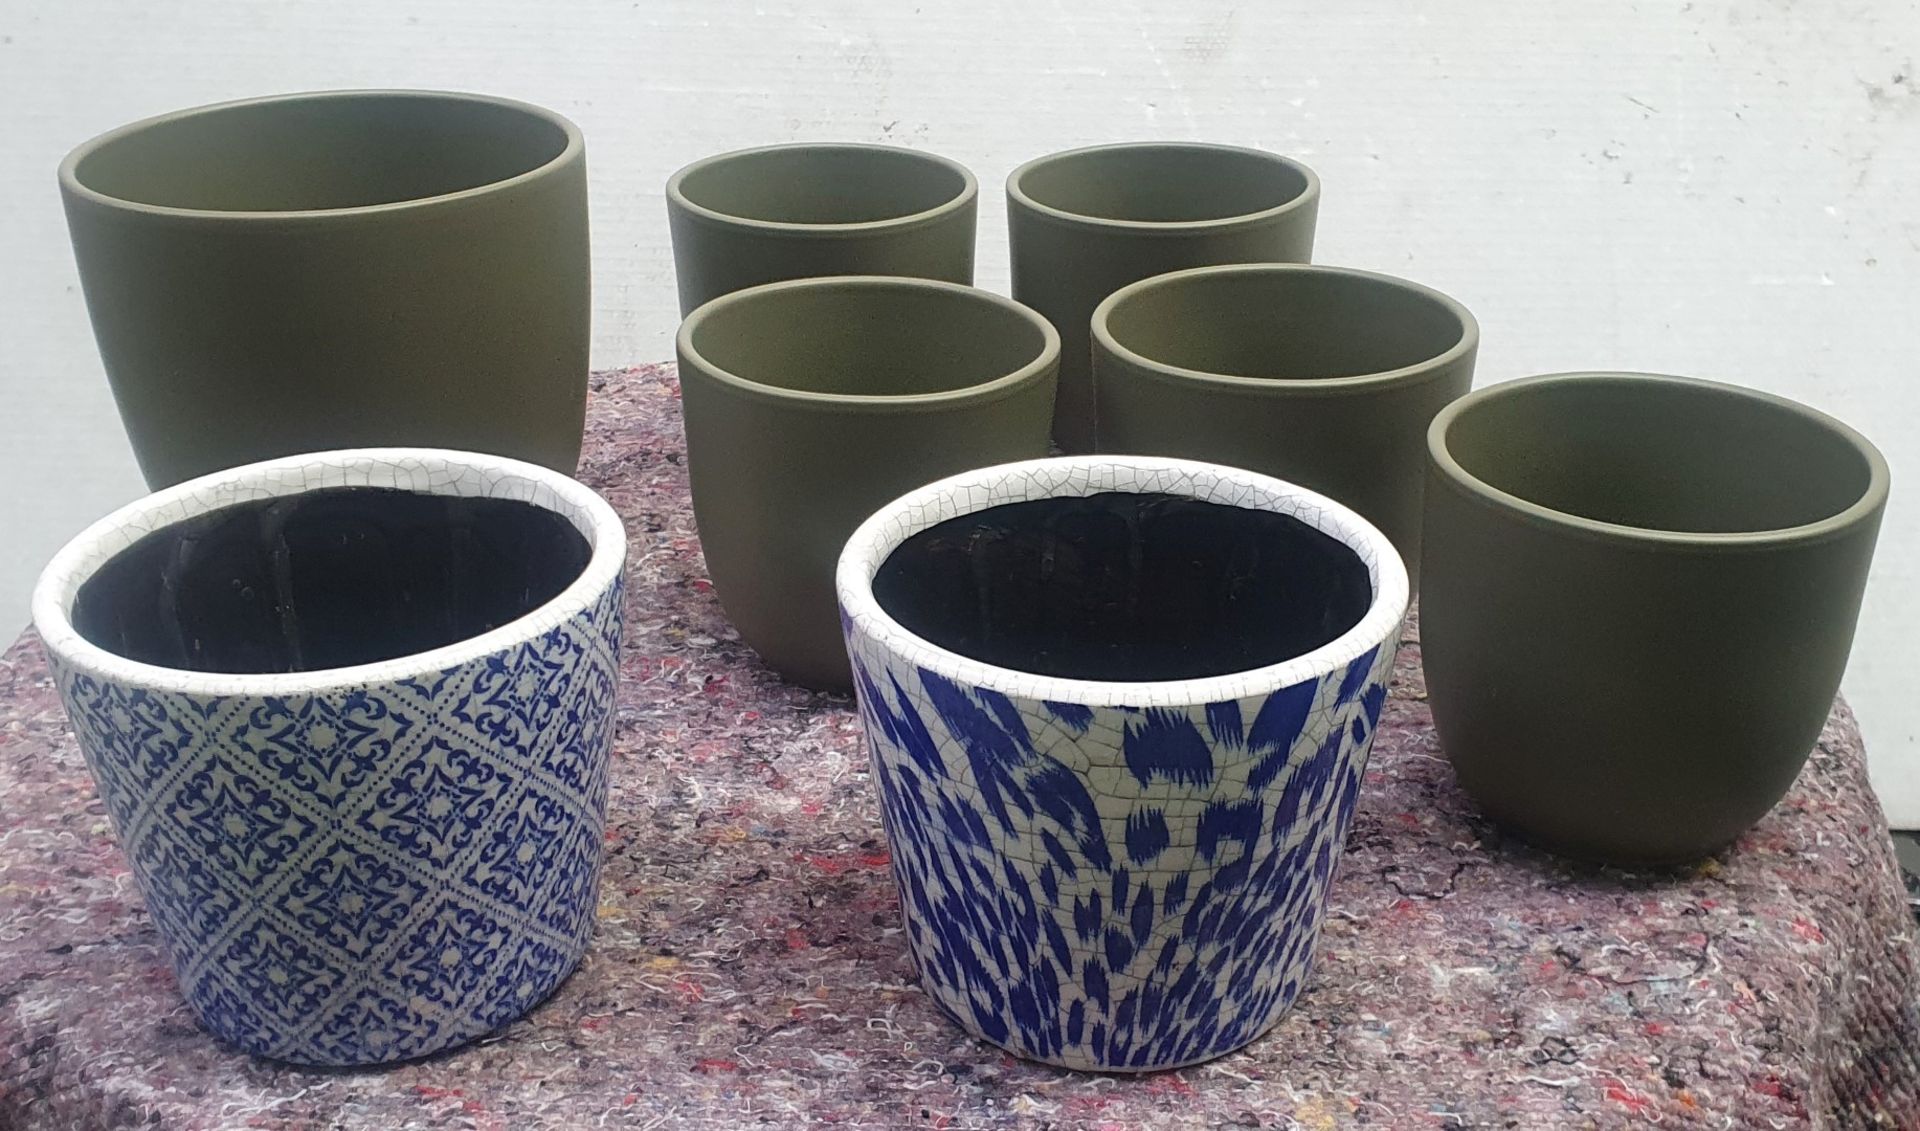 9 x Assorted Plant Pots Including - Includes Vintage and Contemporary Styles - New Stock - Ref: - Image 2 of 11